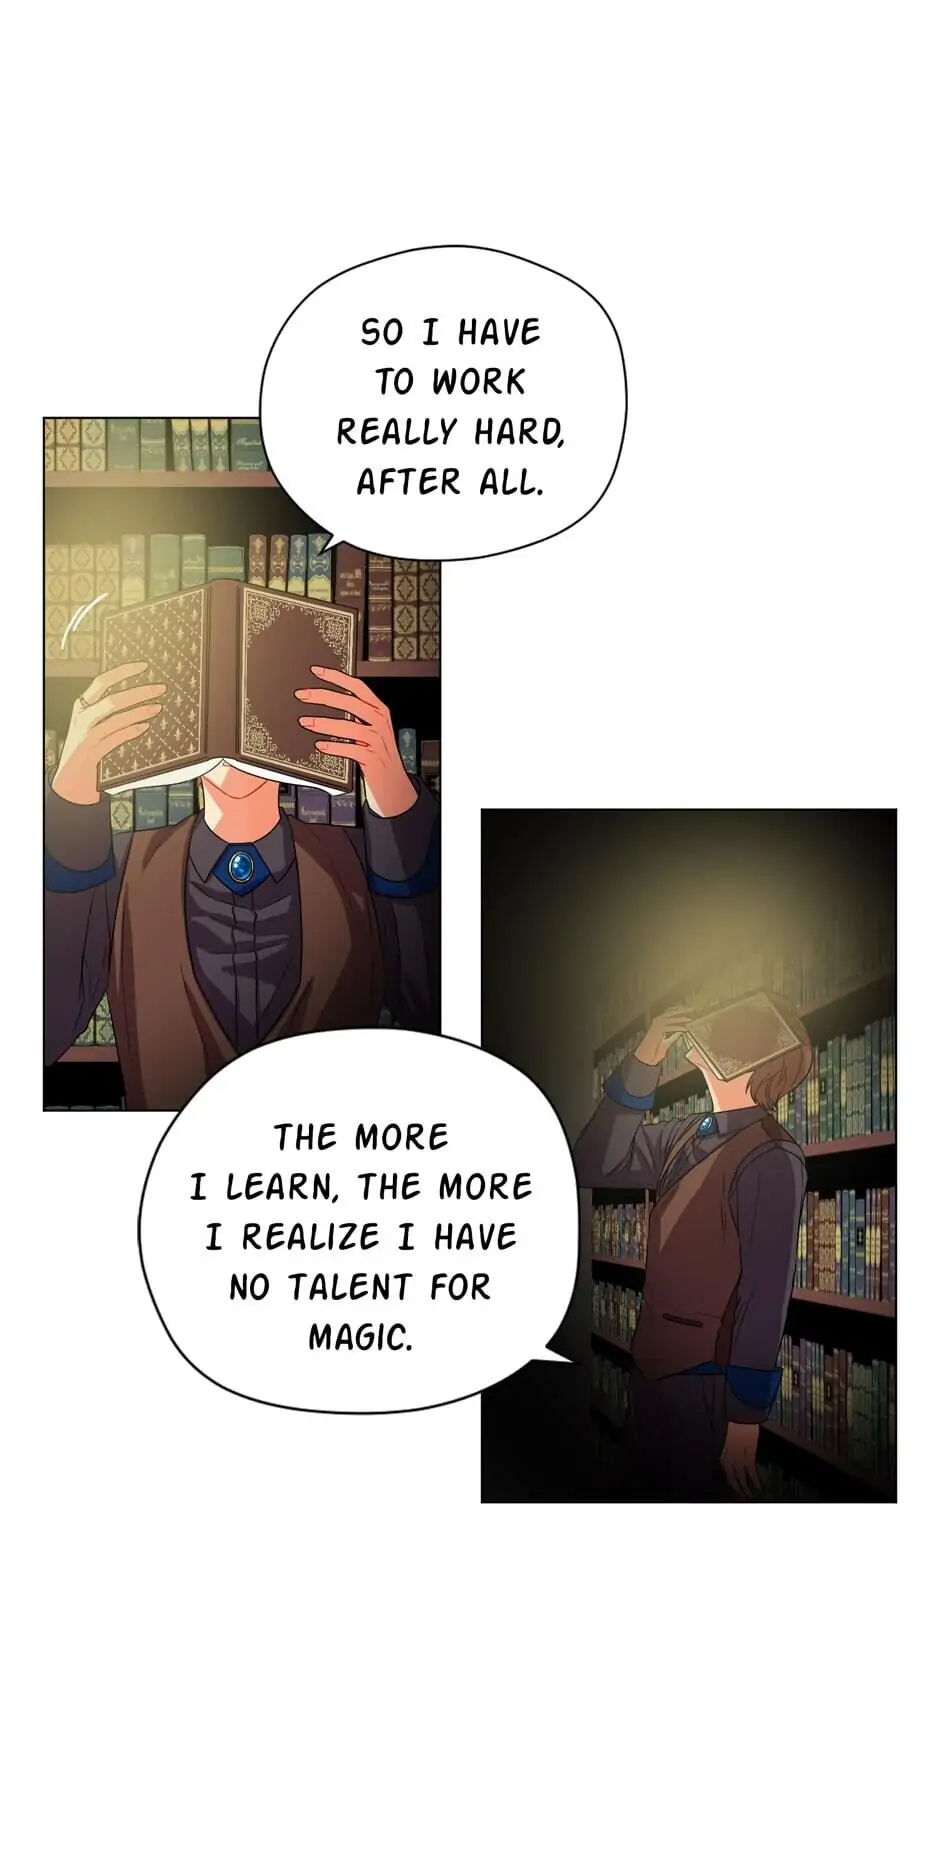 The Magic Tower Librarian chapter 14